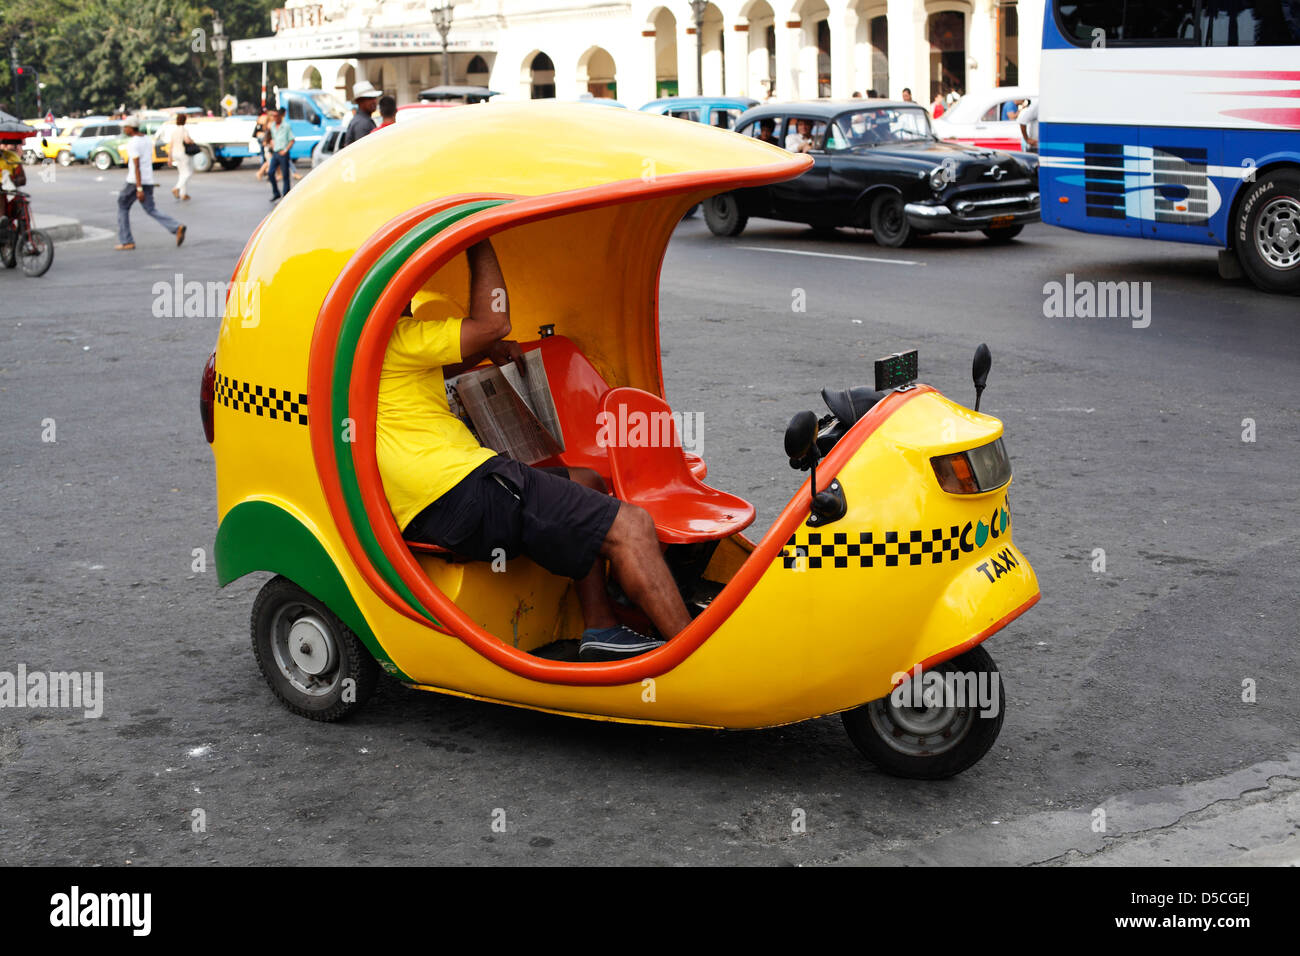 Yellow Coco Taxi In Central Havana Cuba Waiting For A Fare, The Coco Taxi Is A Three Wheeled Motorized Rickshaw Stock Photo